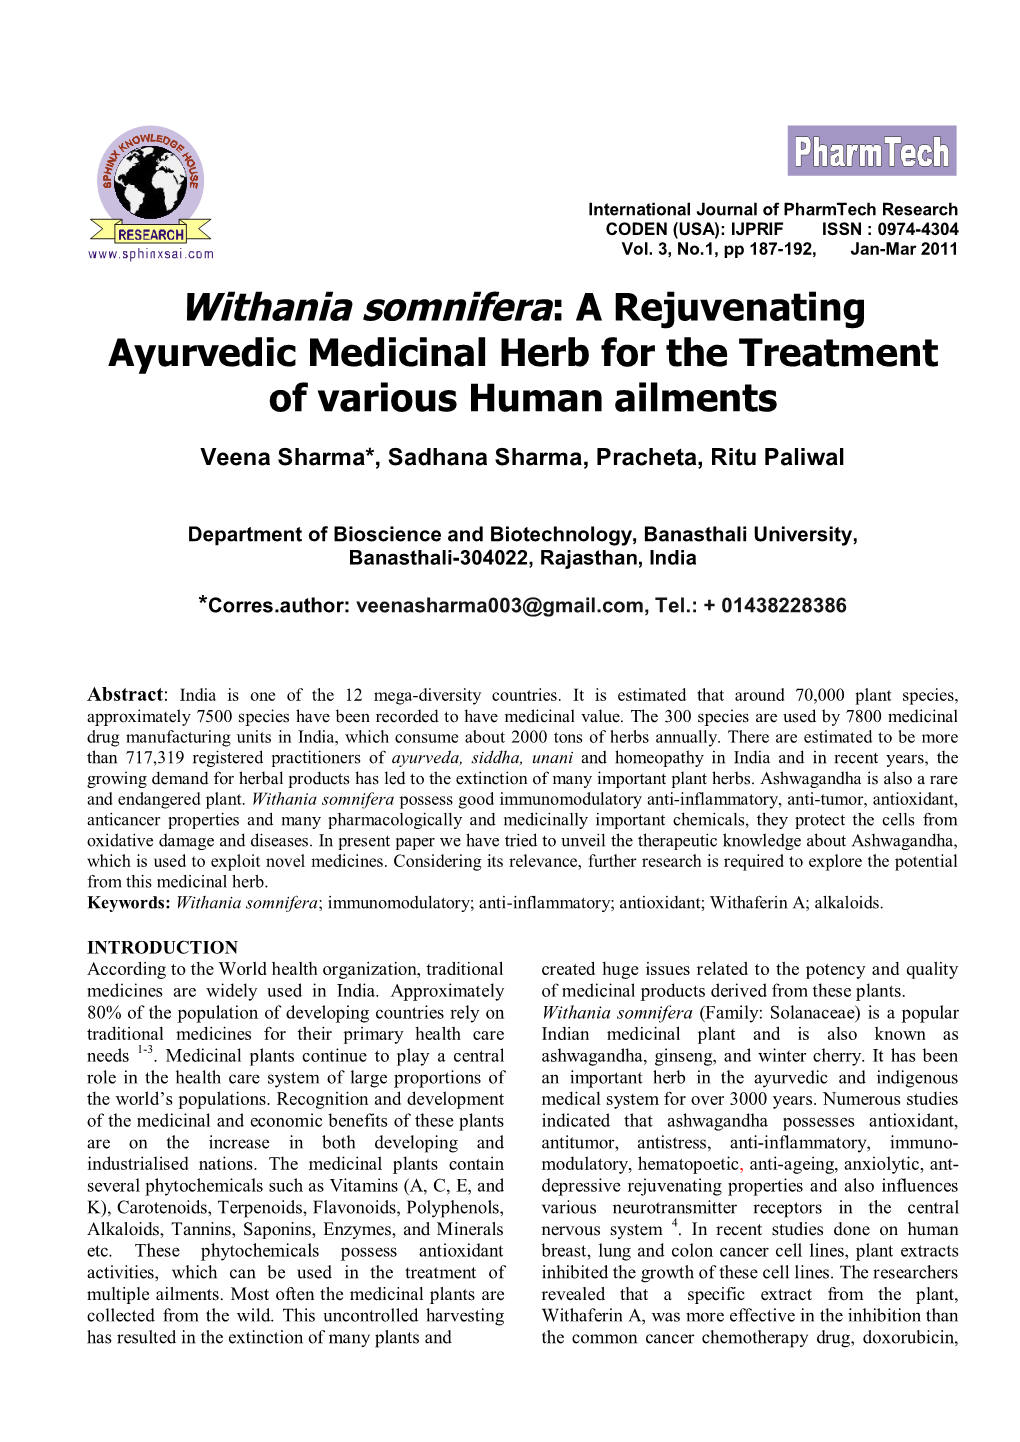 Withania Somnifera: a Rejuvenating Ayurvedic Medicinal Herb for the Treatment of Various Human Ailments